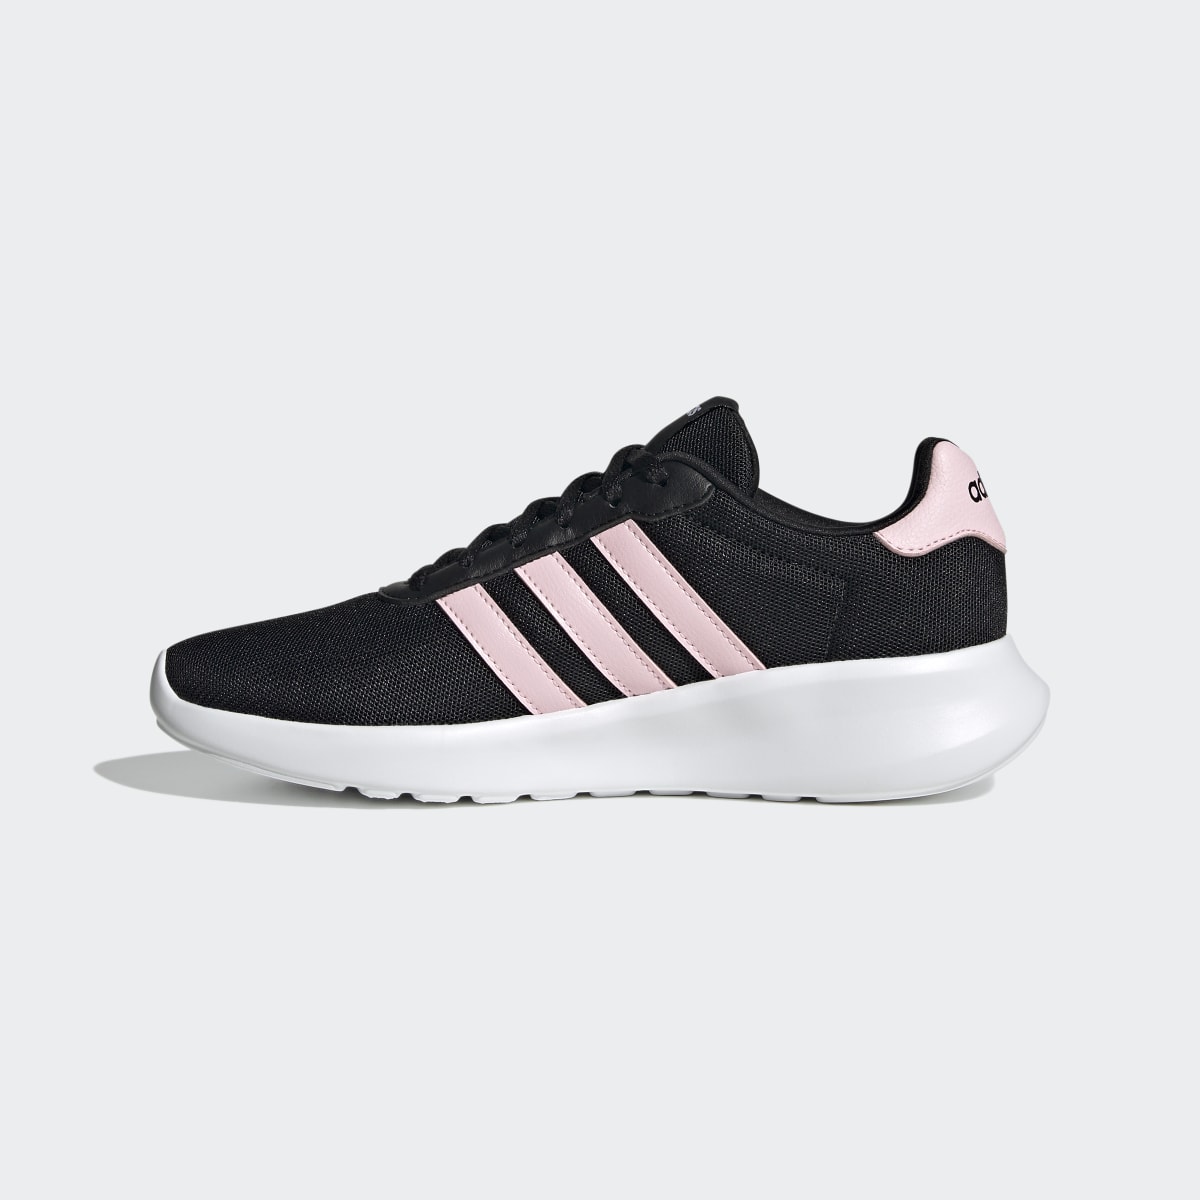 Adidas Lite Racer 3.0 Shoes. 7